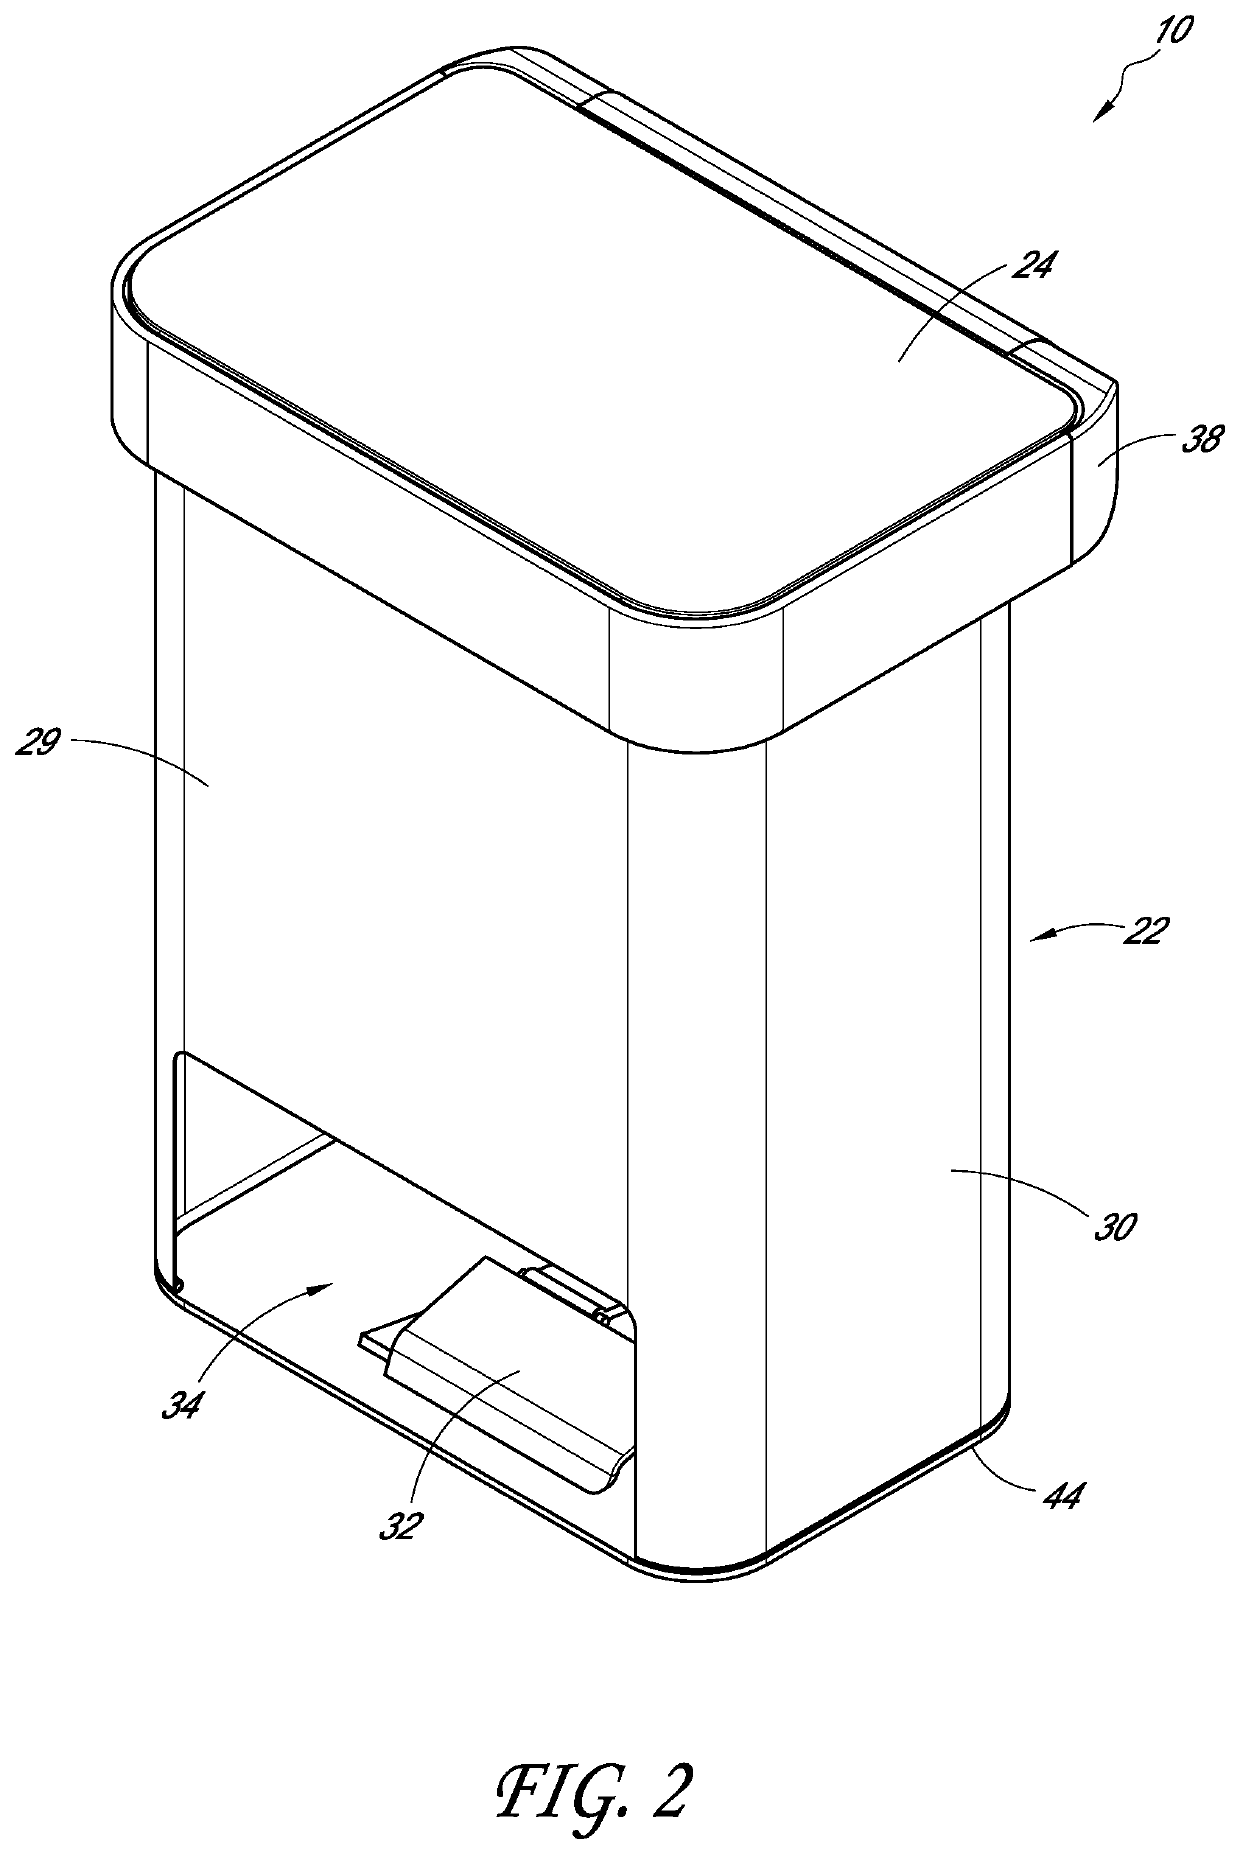 Trash cans with adaptive dampening